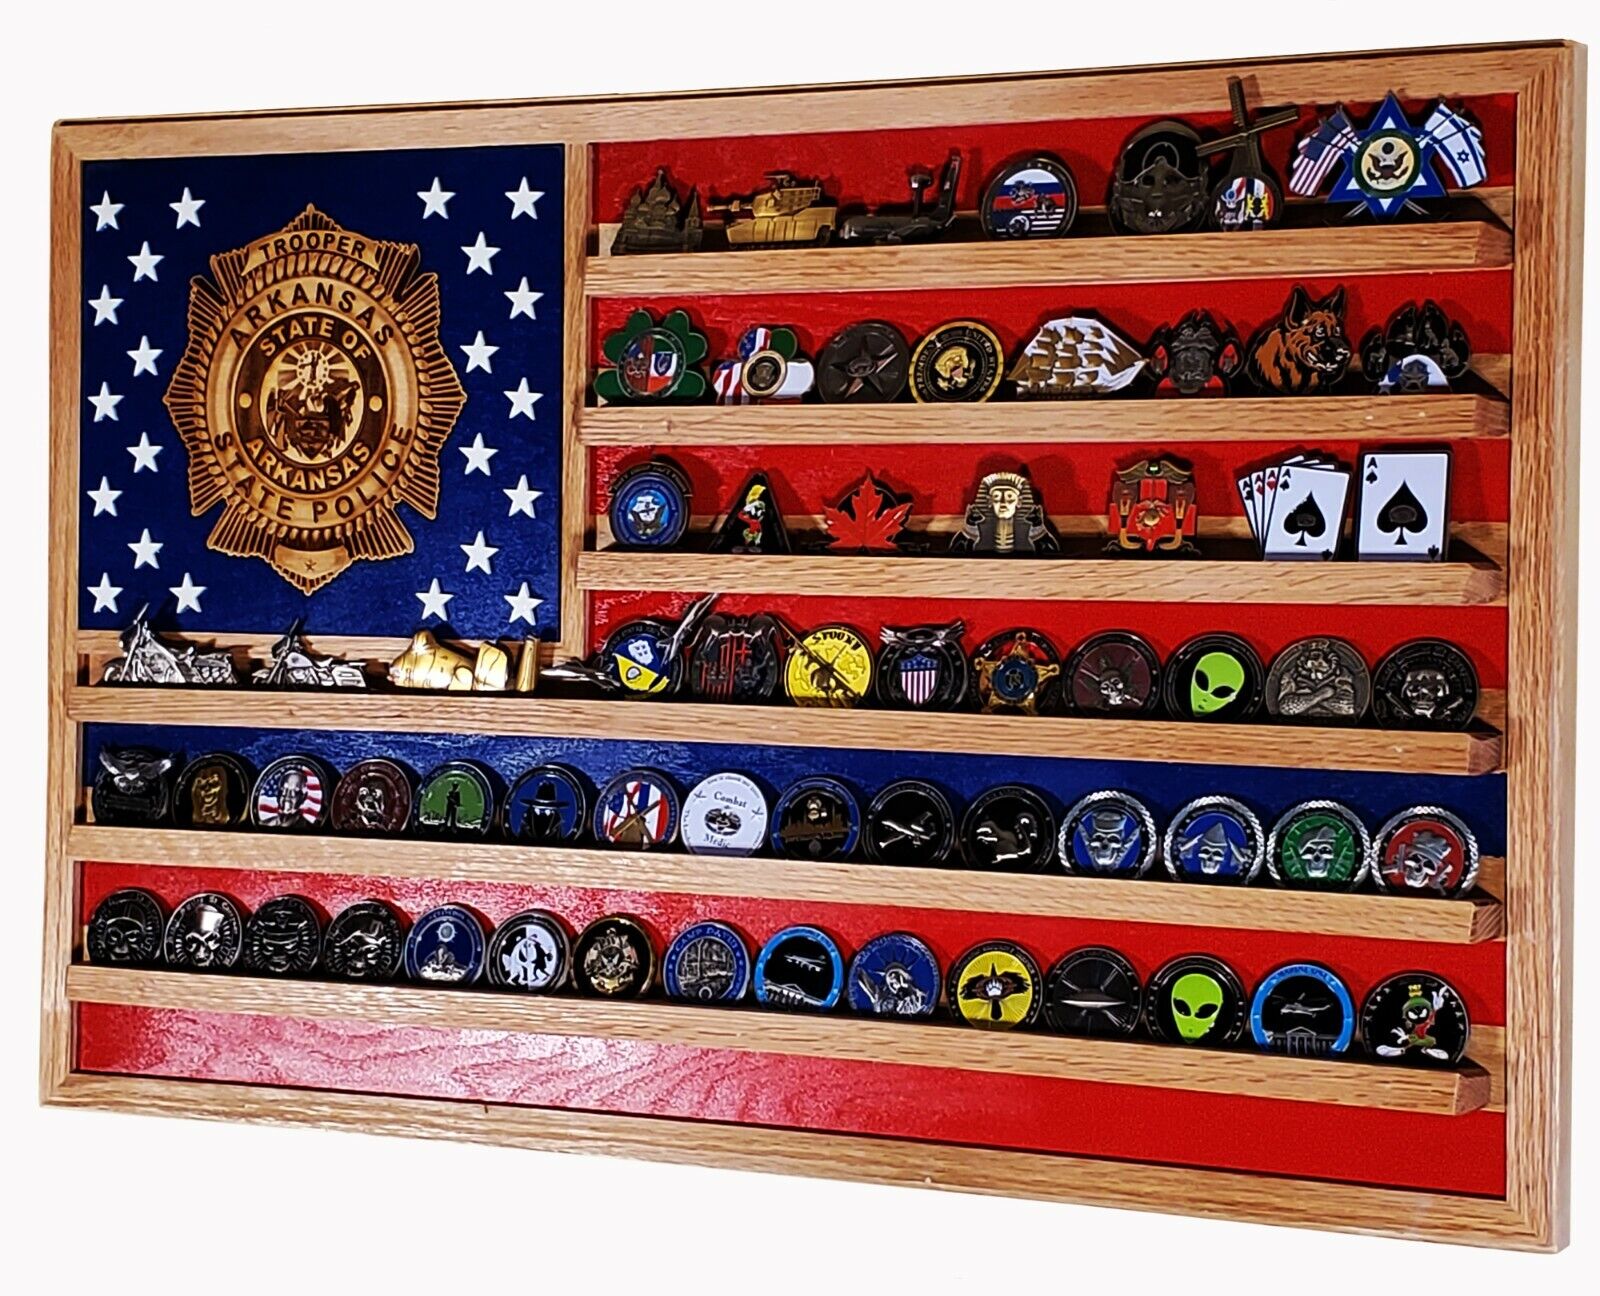 Arkansas State Trooper / Police Challenge Coin Display Flag 70-100 Coins TRAD